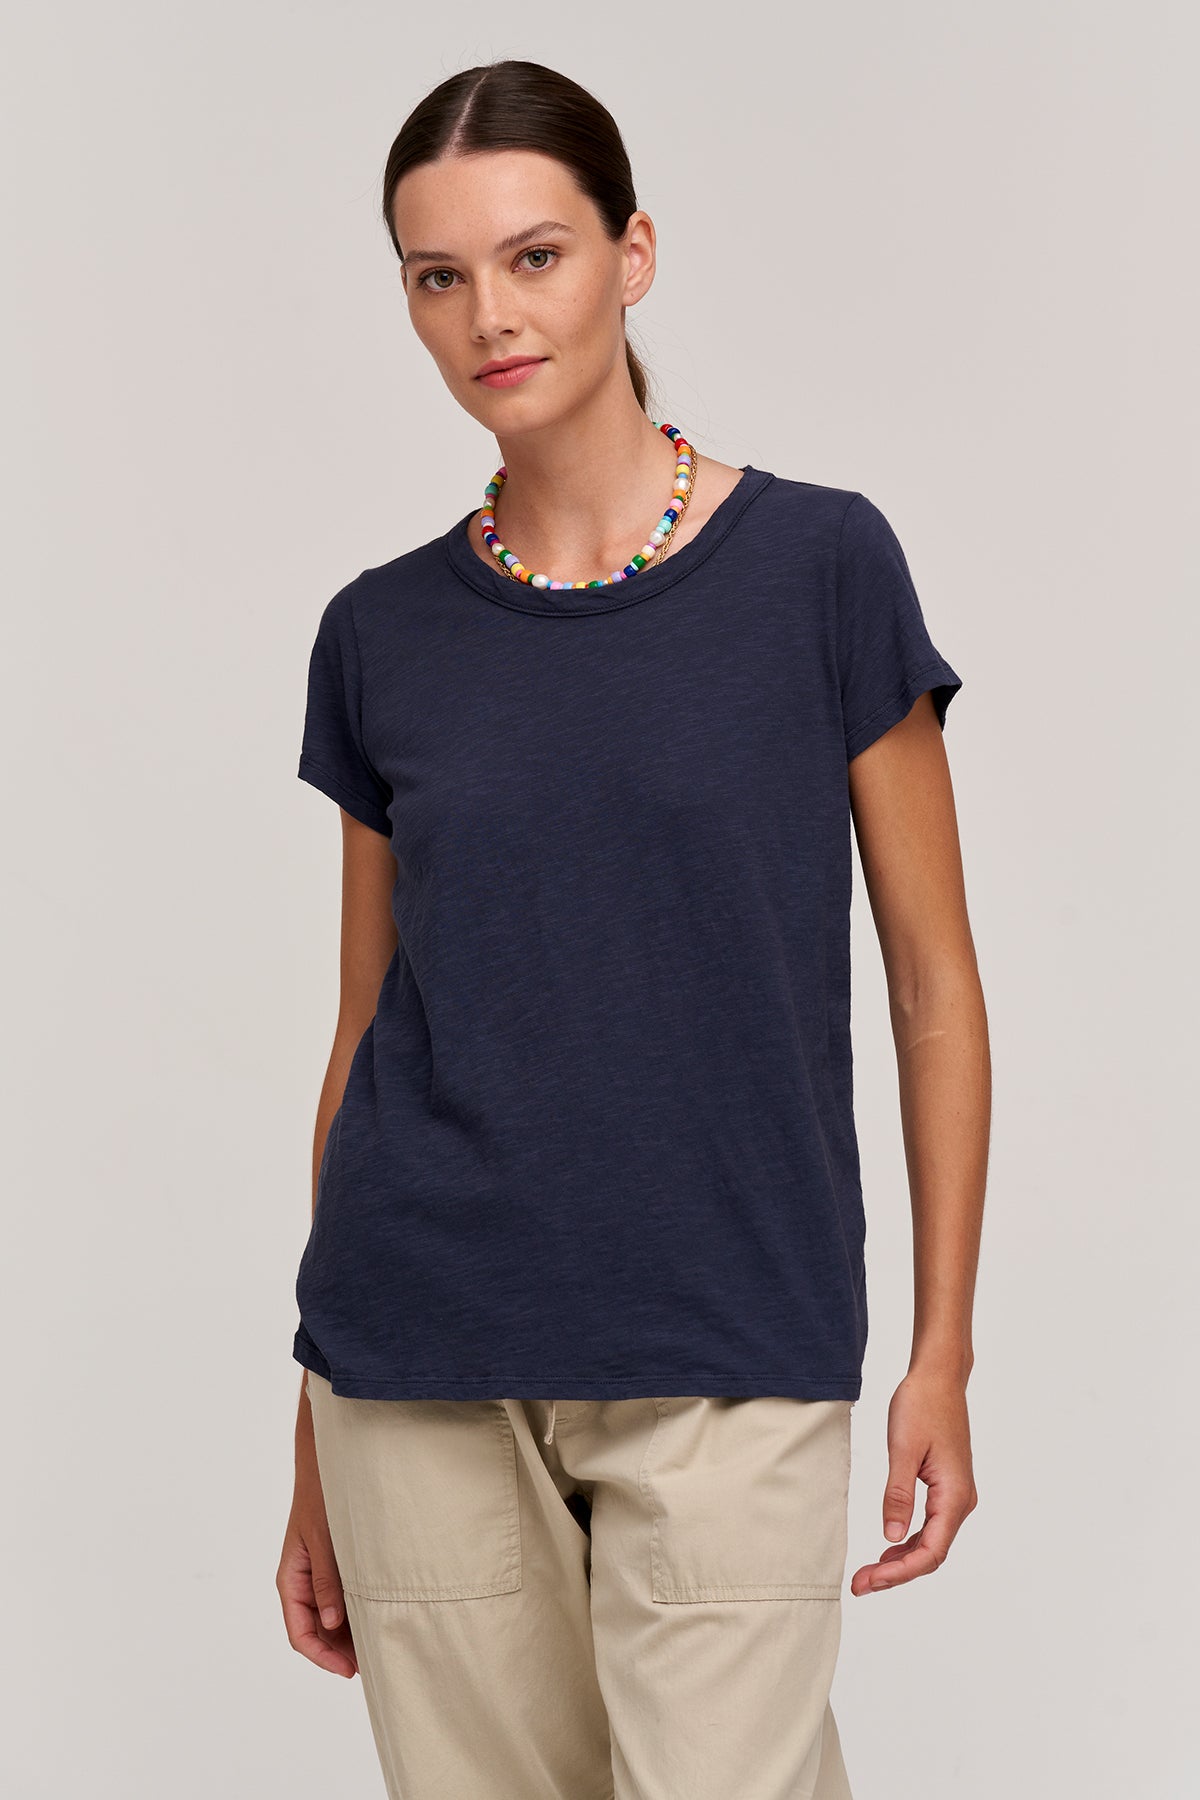 a woman wearing a navy TILLY ORIGINAL SLUB CREW NECK TEE by Velvet by Graham & Spencer and khaki pants.-24532951597249